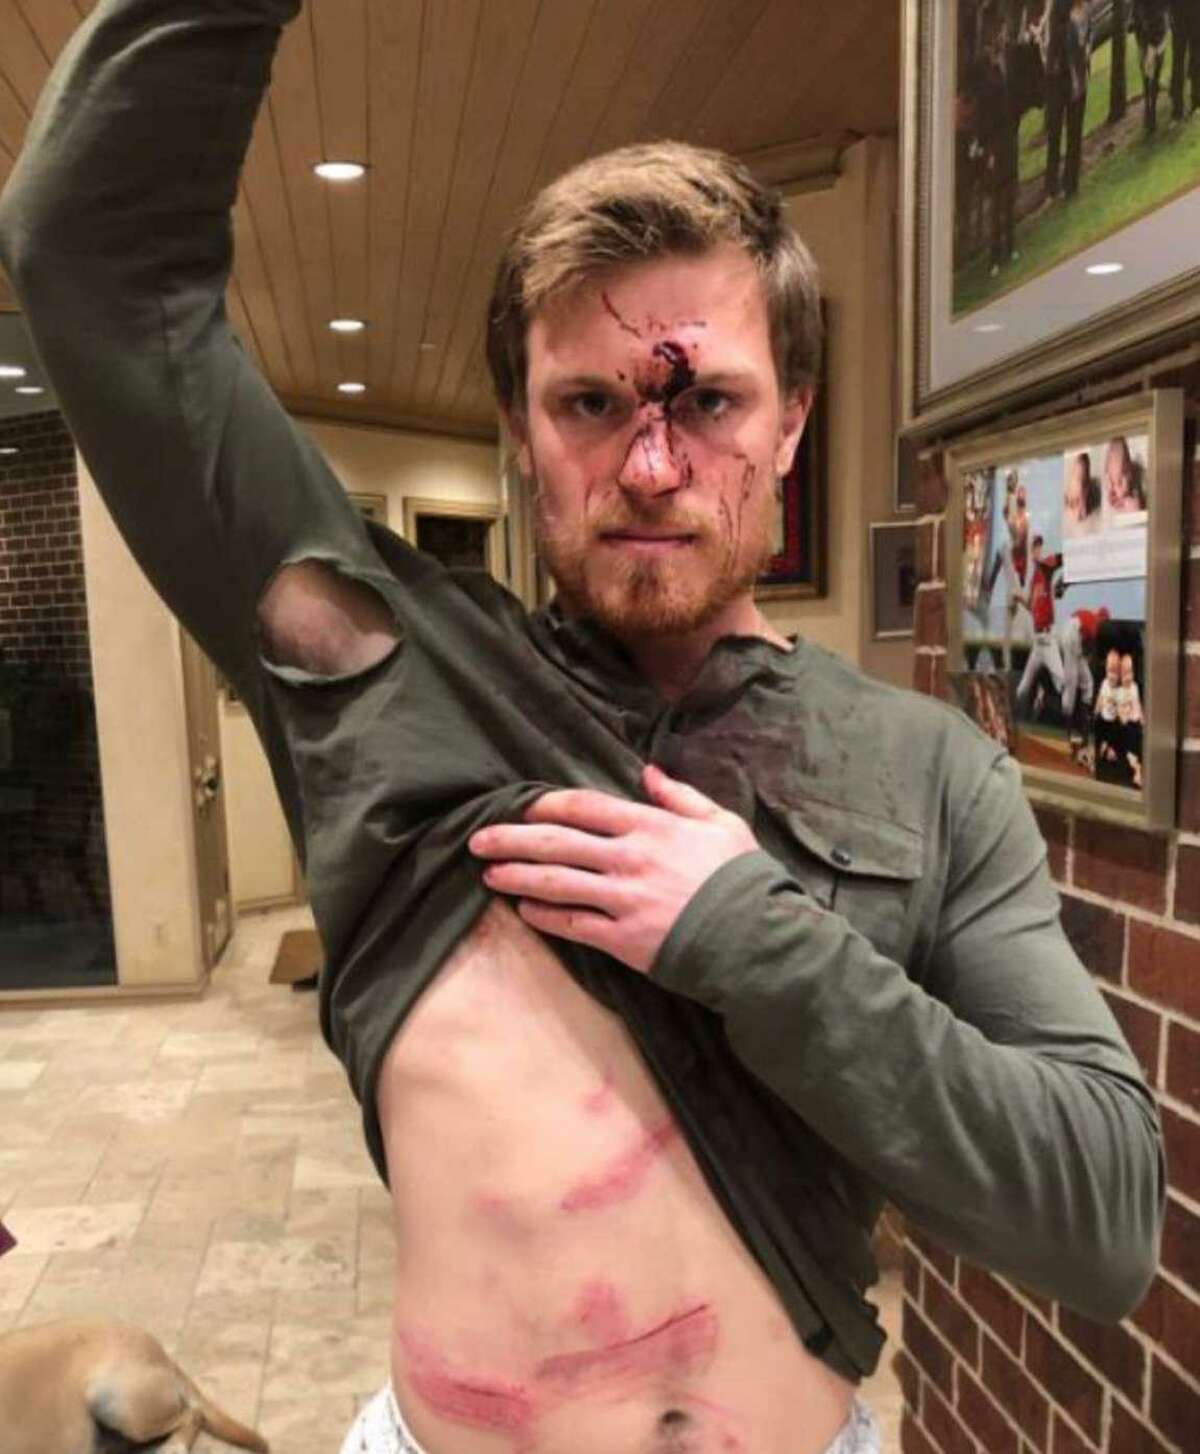 Conner Capel, 21, shows off injuries after a bouncer at Houston's Concrete Cowboy Bar allegedly assaulted him and 24-year-old Kacy Clemens, the son of former Houston Astros pitcher Roger Clemens, on Jan. 1, 2019.